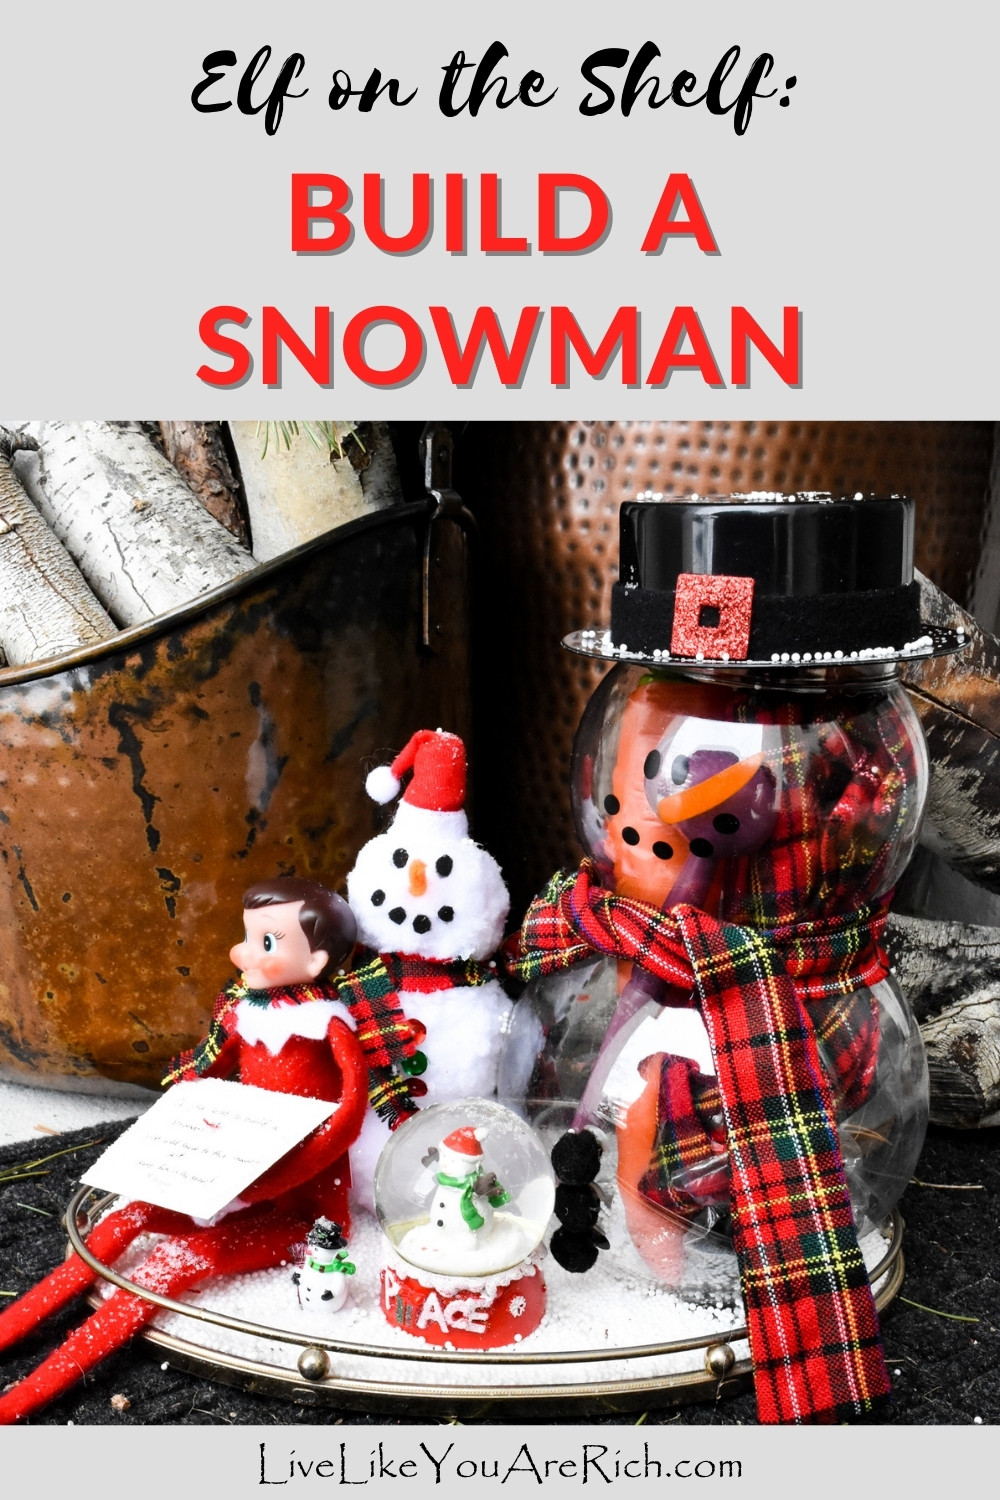 Elf on the Shelf: Do You Want to Build a Snowman?